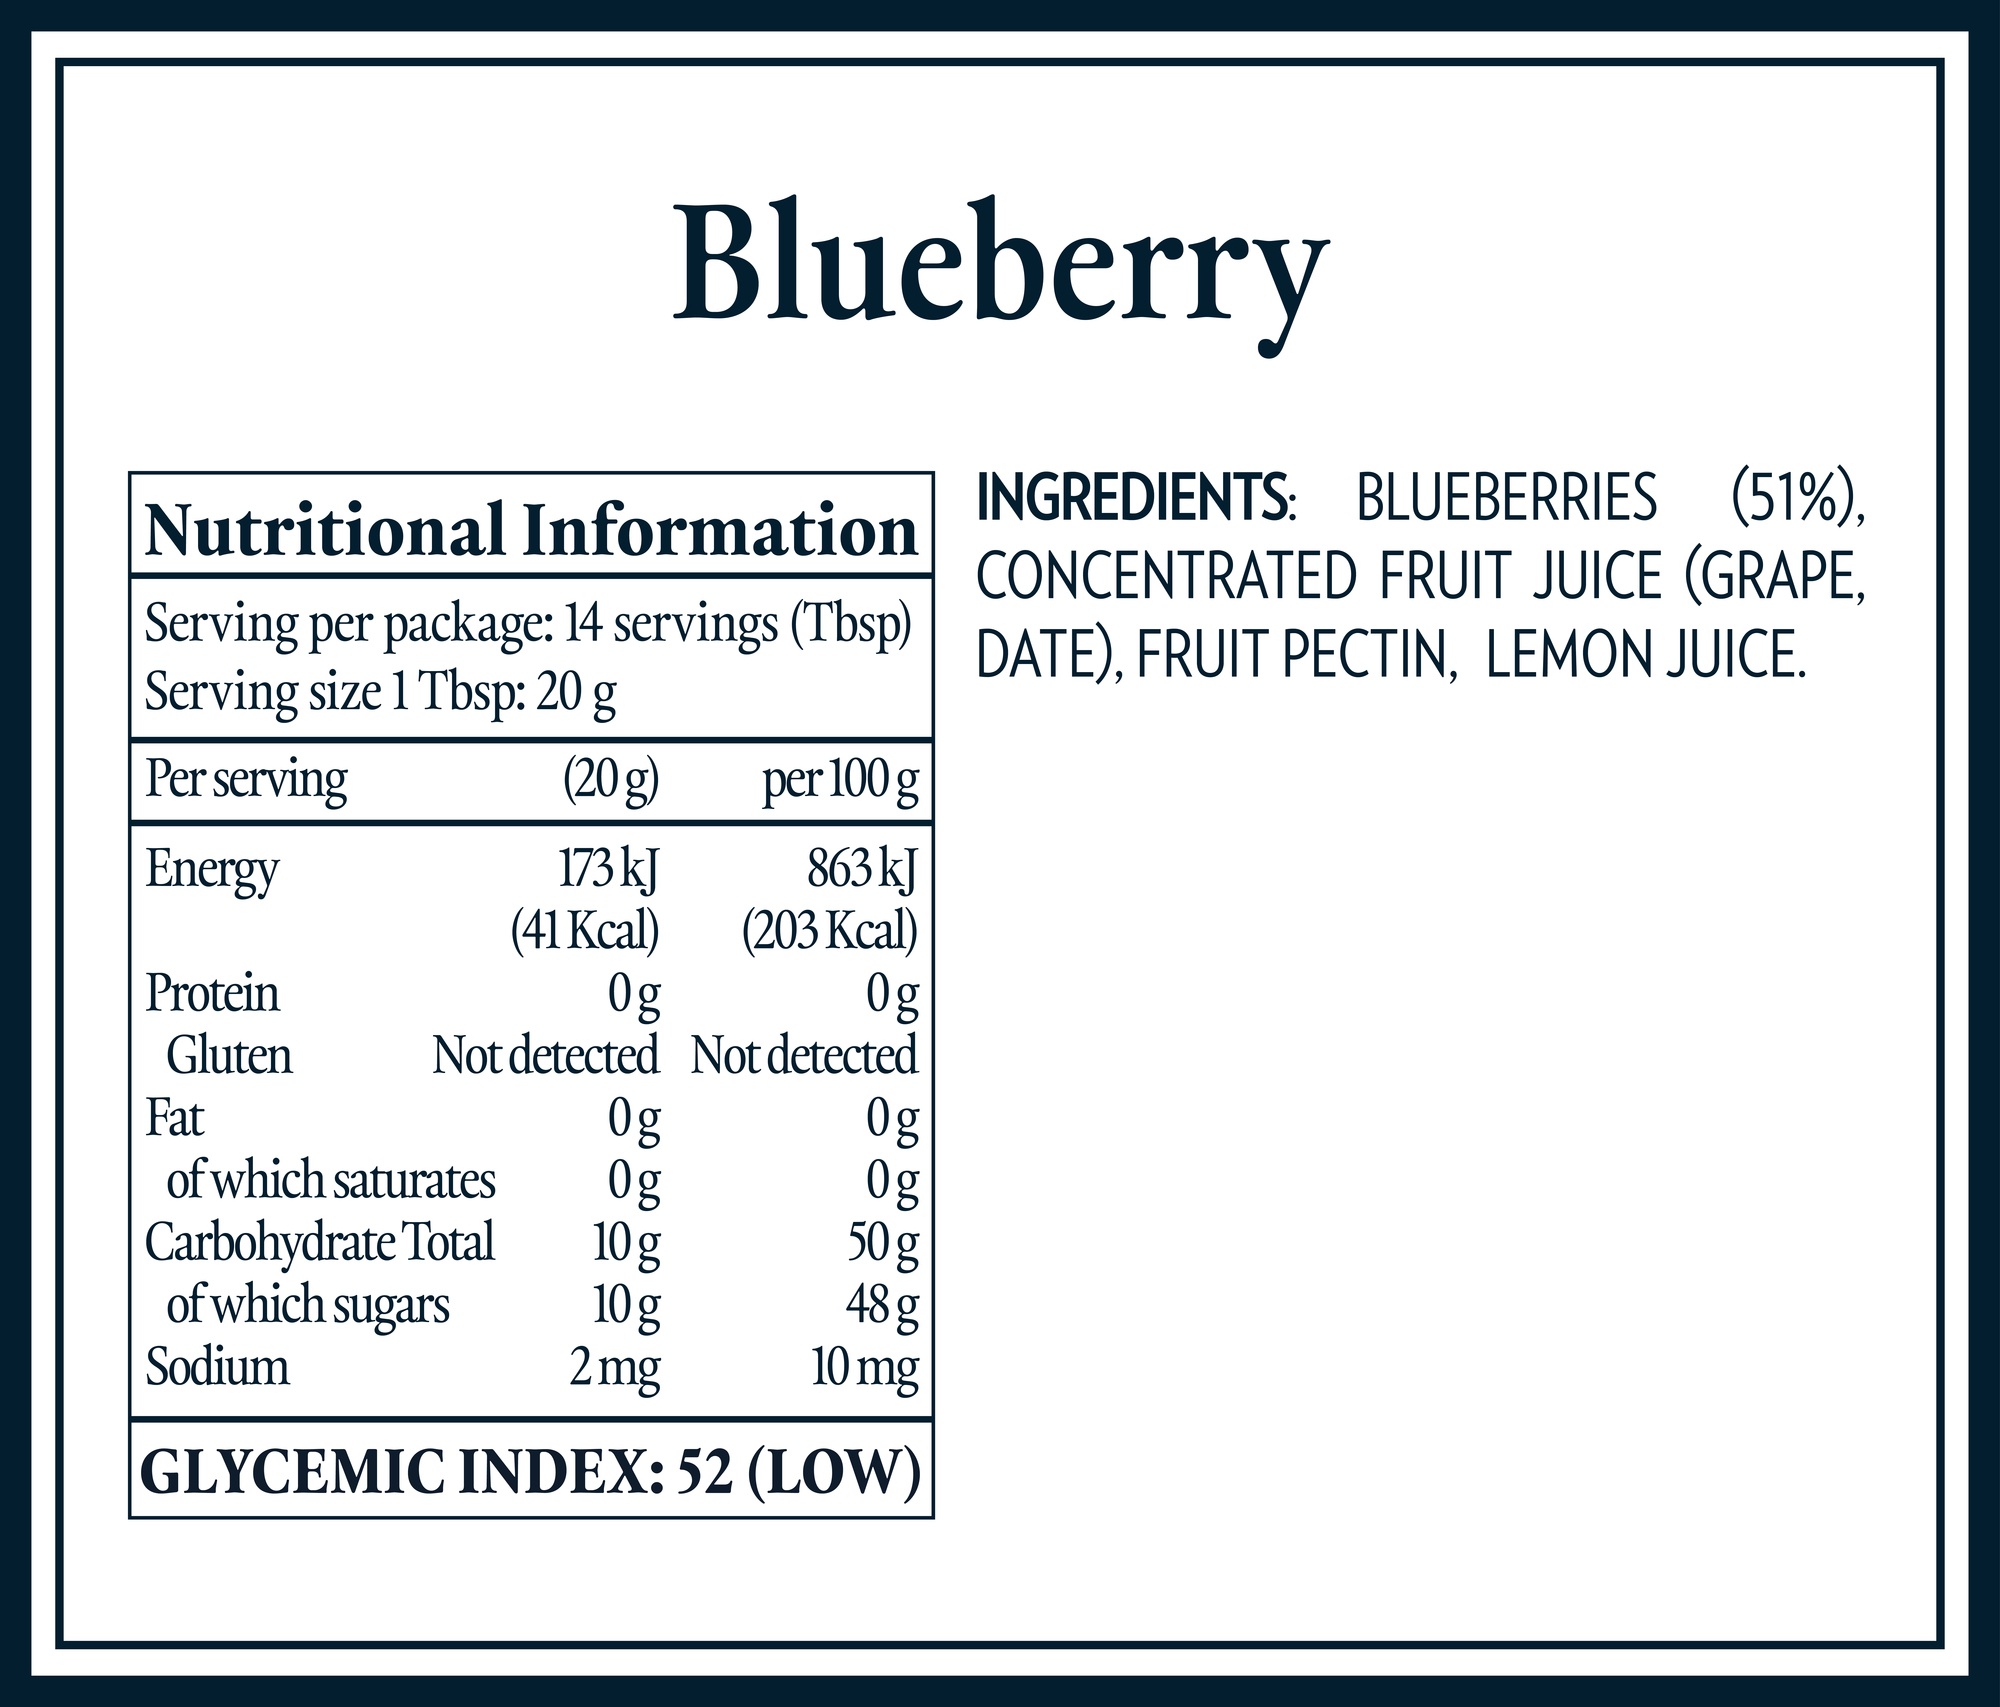 Nutrition Tables & Ingredients_AUS_blueberry